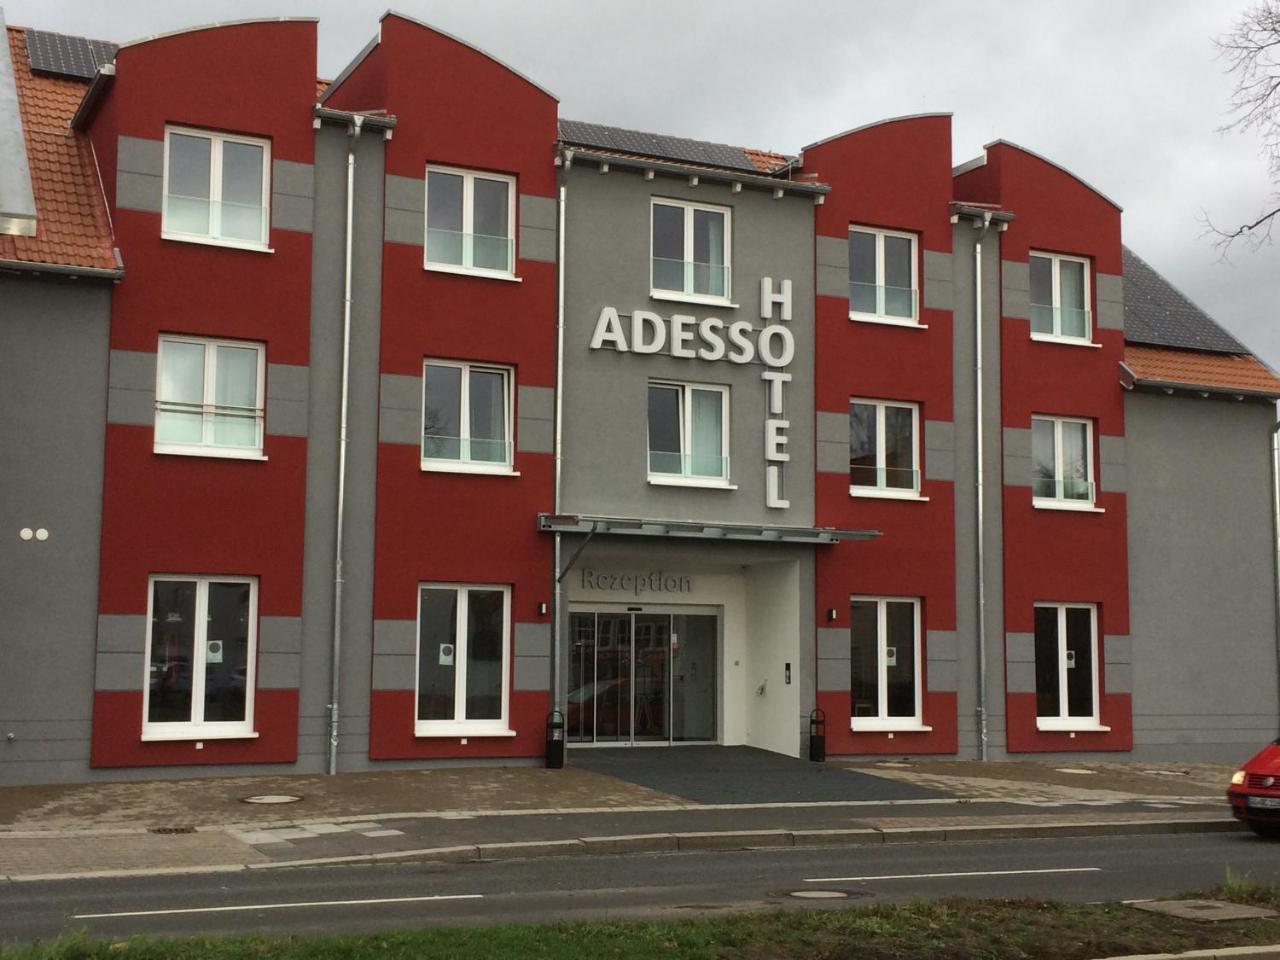 Adesso Hotel Gottingen - Pay At Property On Arrival-Ihr Automatenhotel In 괴팅겐 외부 사진